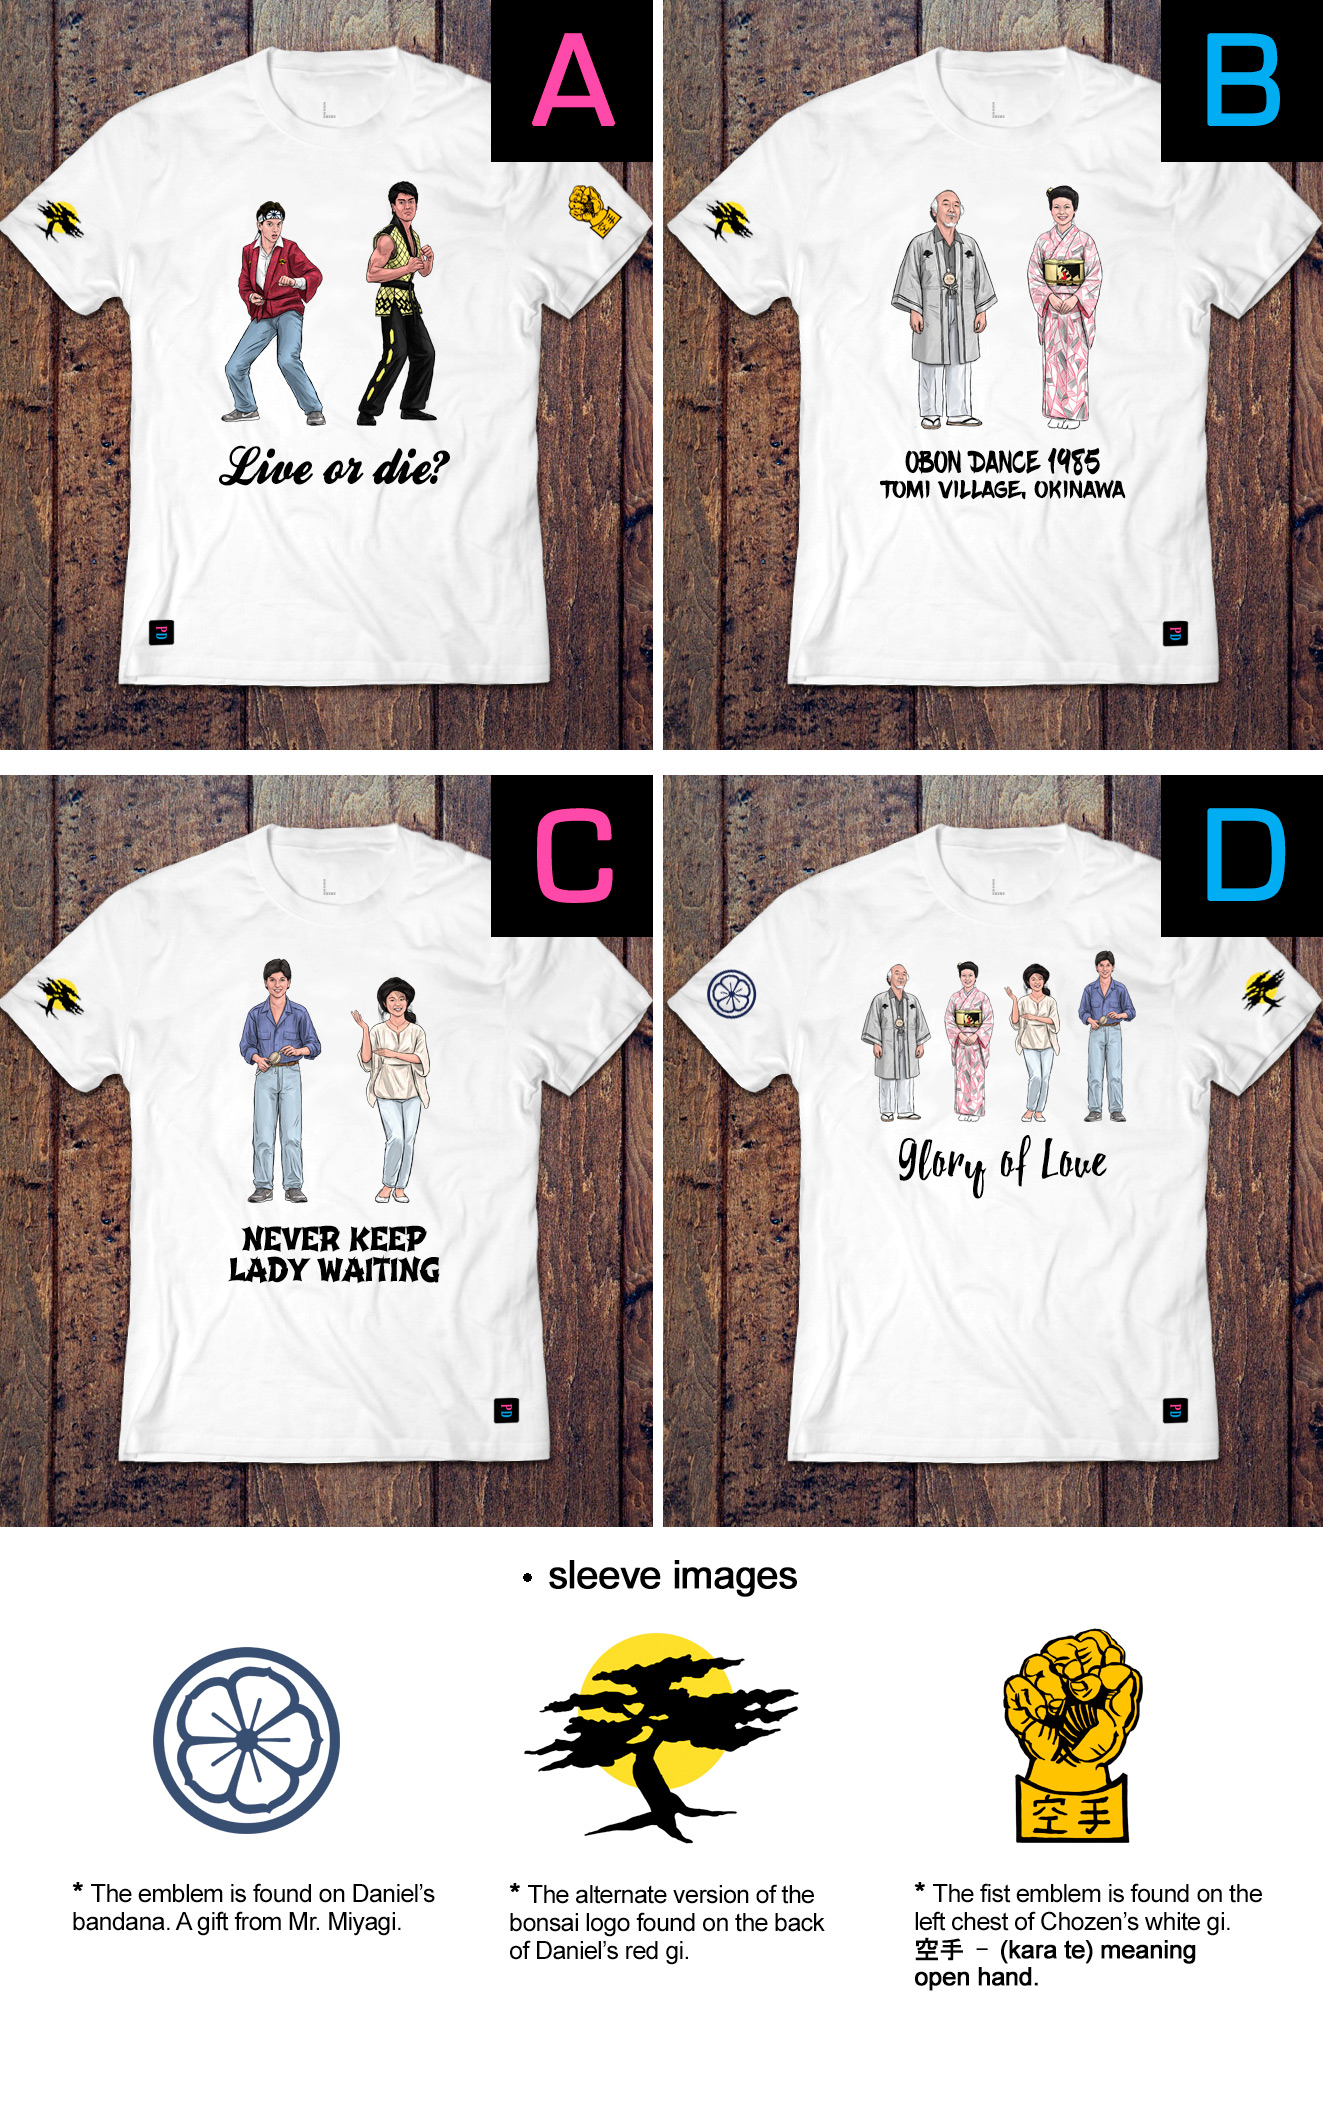 This For Real PD T-Shirt designs by Marten Go aka MGO